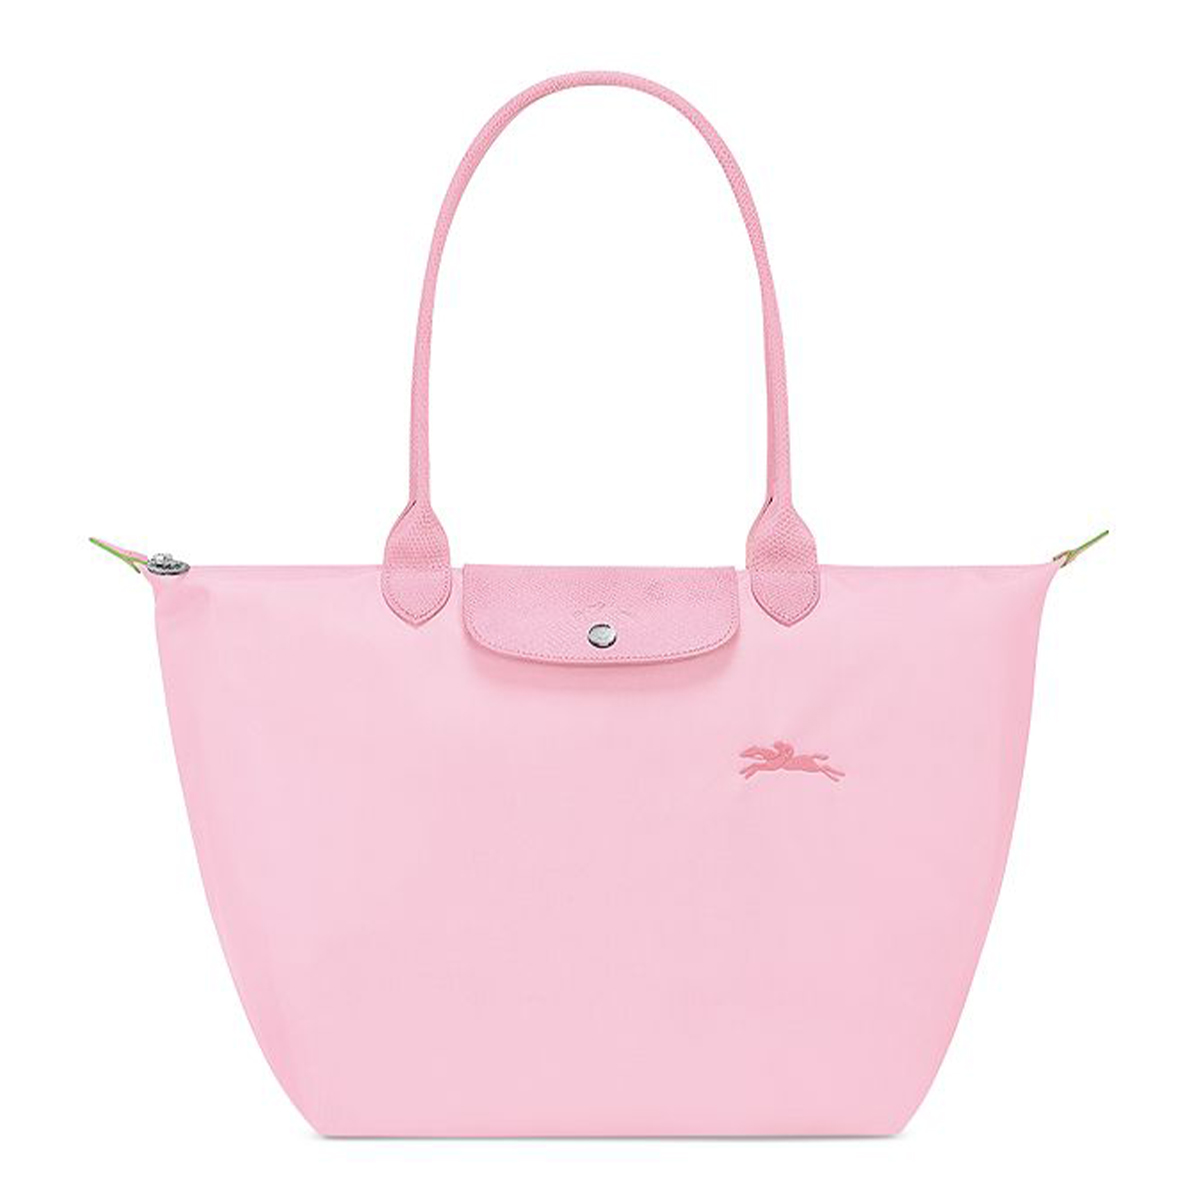 Longchamp + Le Pliage Recycled Tote